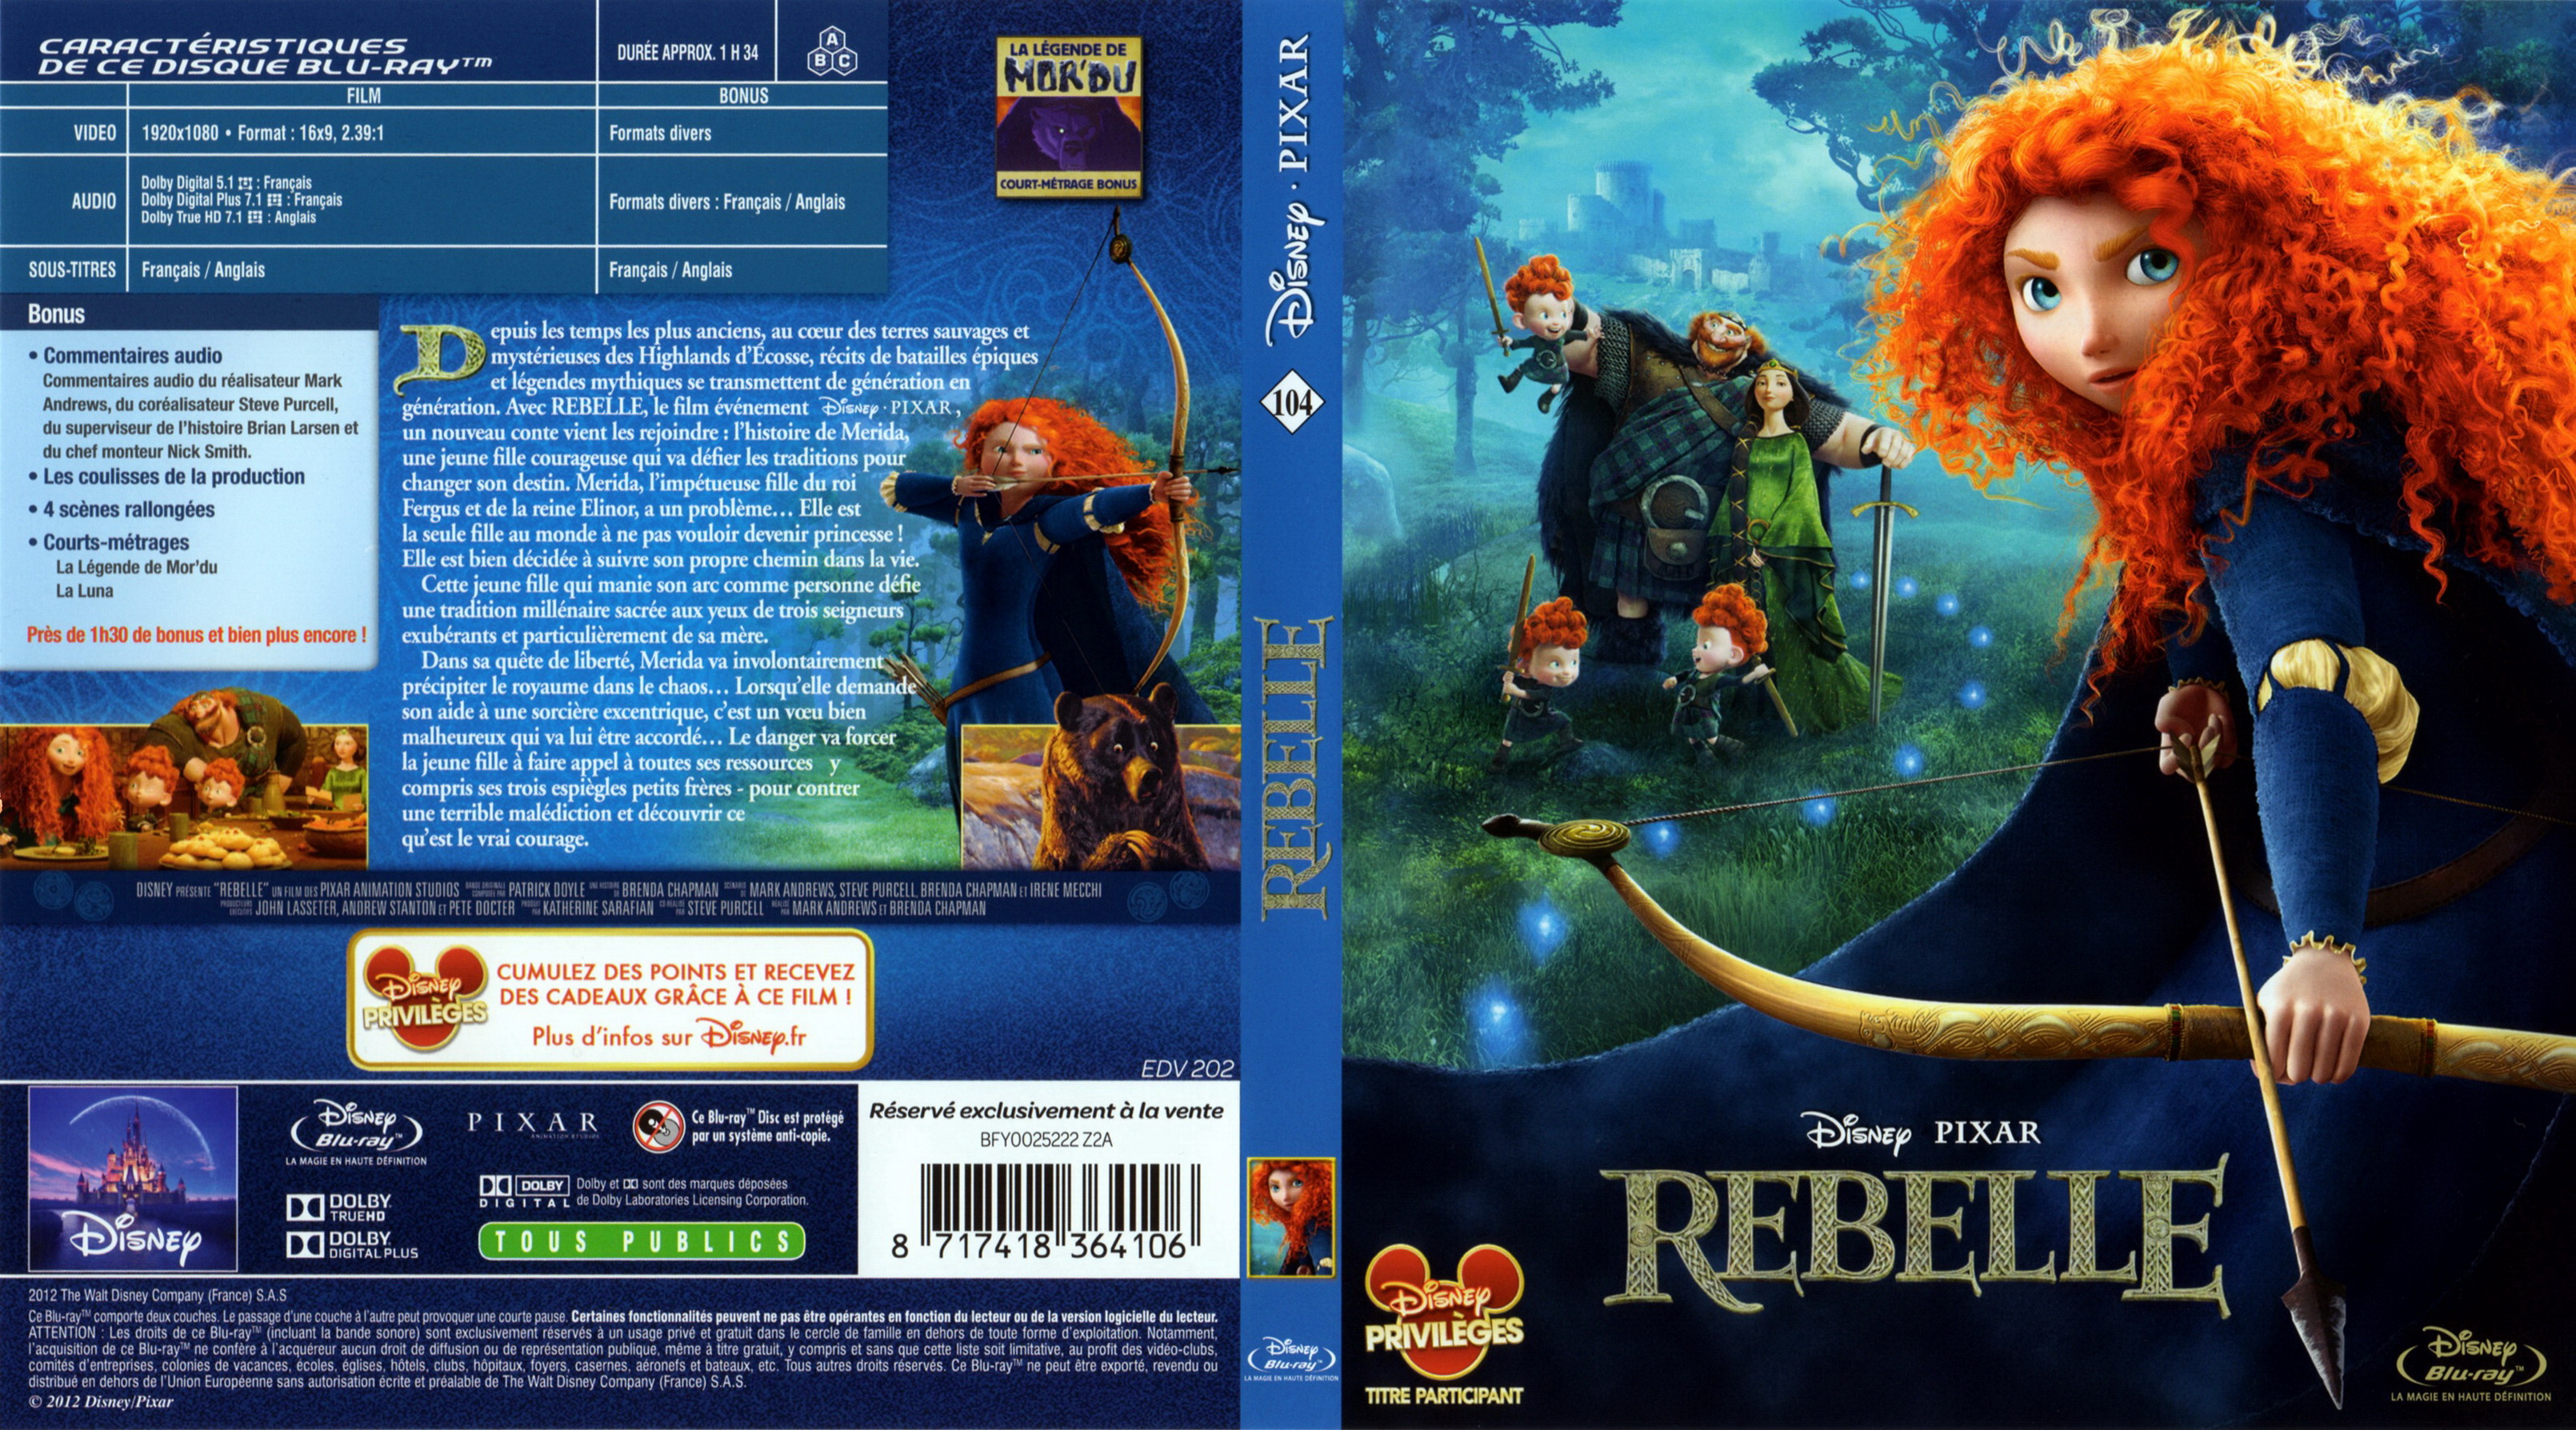 Jaquette DVD Rebelle (BLU-RAY)